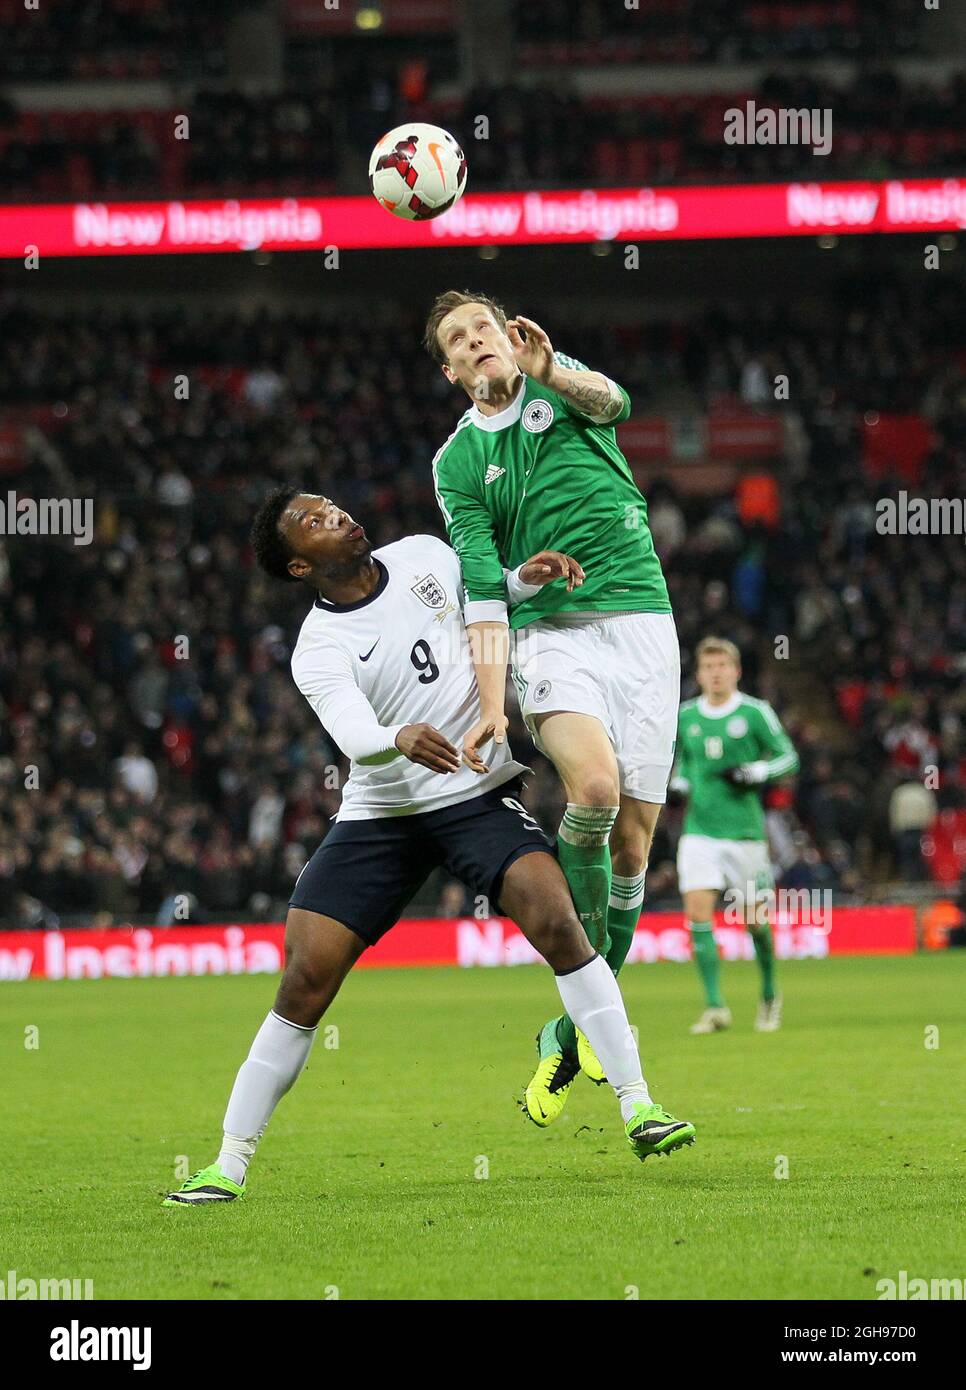 England's Daniel Sturridge tussles with Germany's Marcell Jansen during the International Friendly match between England and Germany held at the Wembley Stadium in London on Nov. 19, 2013. Stock Photo